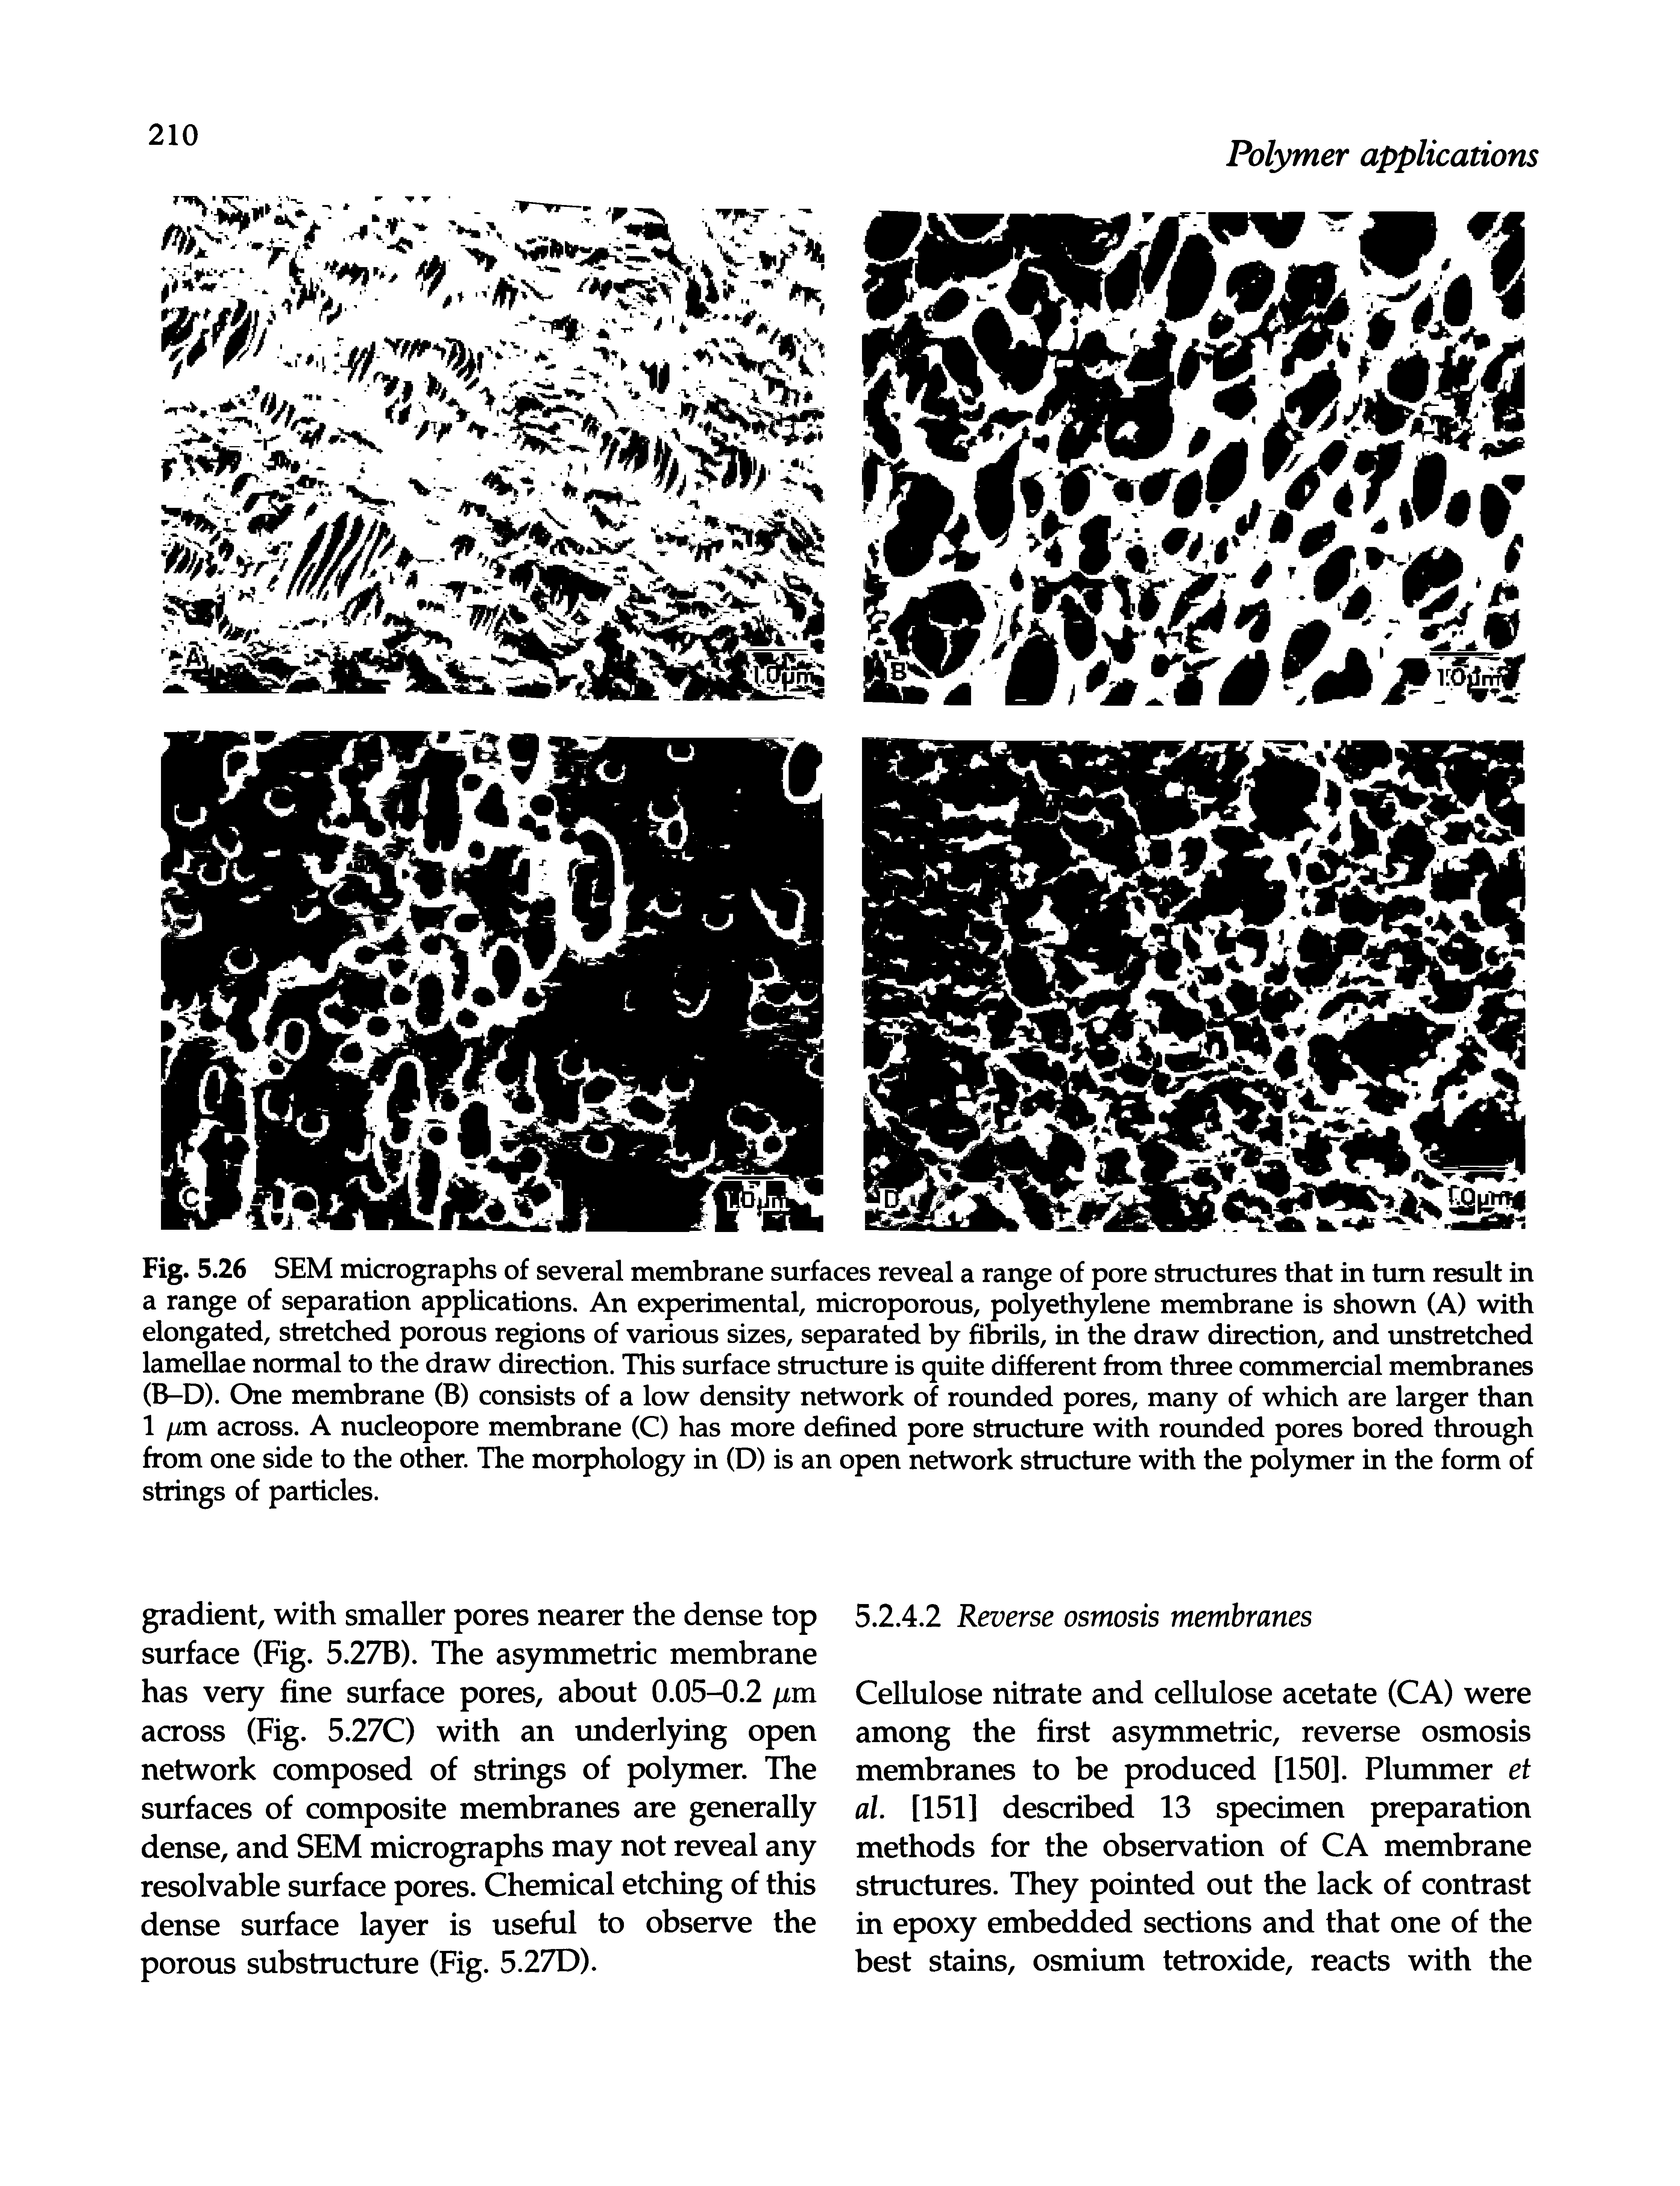 Fig. 5.26 SEM micrographs of several membrane surfaces reveal a range of pore structures that in turn result in a range of separation applications. An experimental, microporous, polyethylene membrane is shown (A) with elongated, stretched porous regions of various sizes, separated by fibrils, in the draw direction, and unstretched lamellae normal to the draw direction. This surface structure is quite different from three commercial membranes (B-D). One membrane (B) consists of a low density network of rounded pores, many of which are larger than 1 /im across. A nucleopore membrane (C) has more defined pore structure with rounded pores bored through from one side to the other. The morphology in (D) is an open network structure with the polymer in the form of strings of particles.